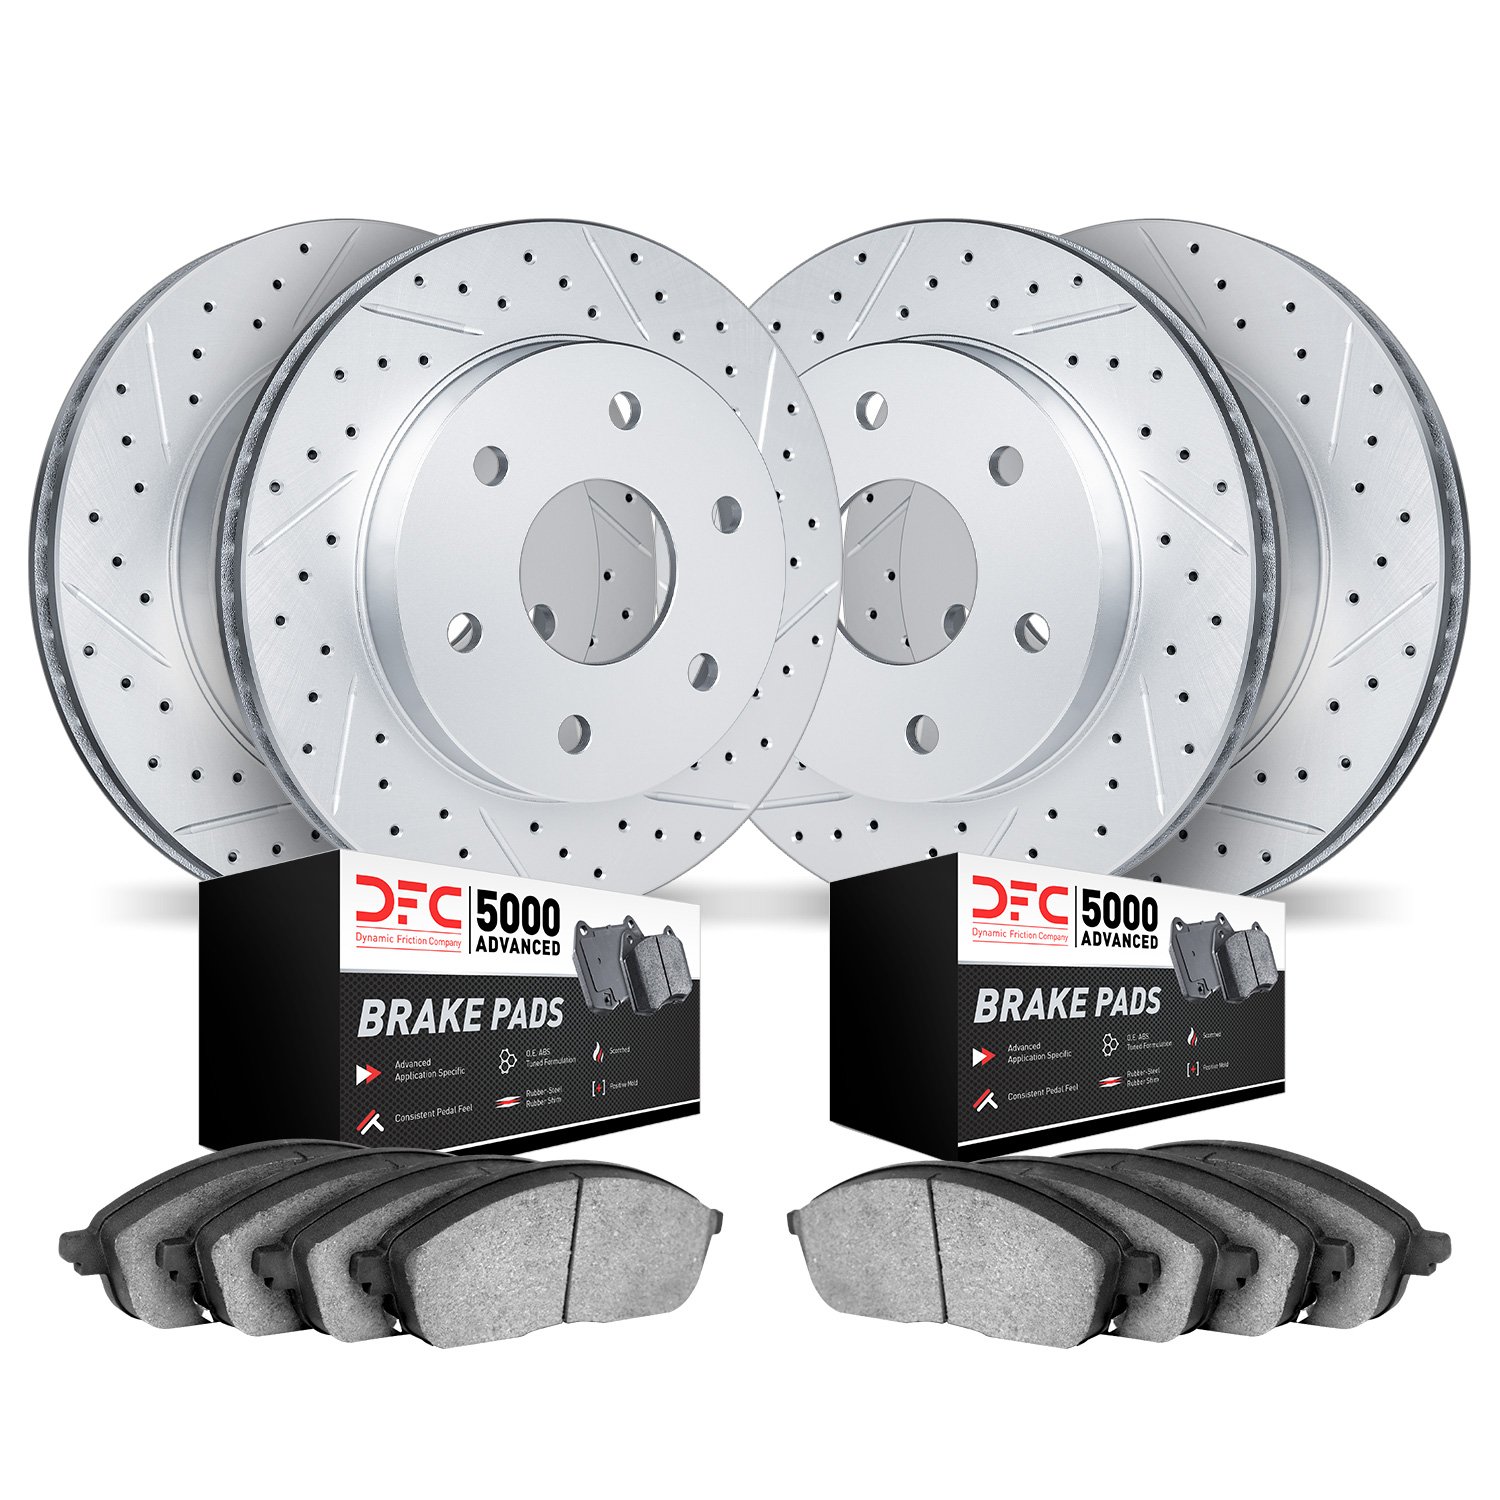 2504-48041 Geoperformance Drilled/Slotted Rotors w/5000 Advanced Brake Pads Kit, 2015-2020 GM, Position: Front and Rear